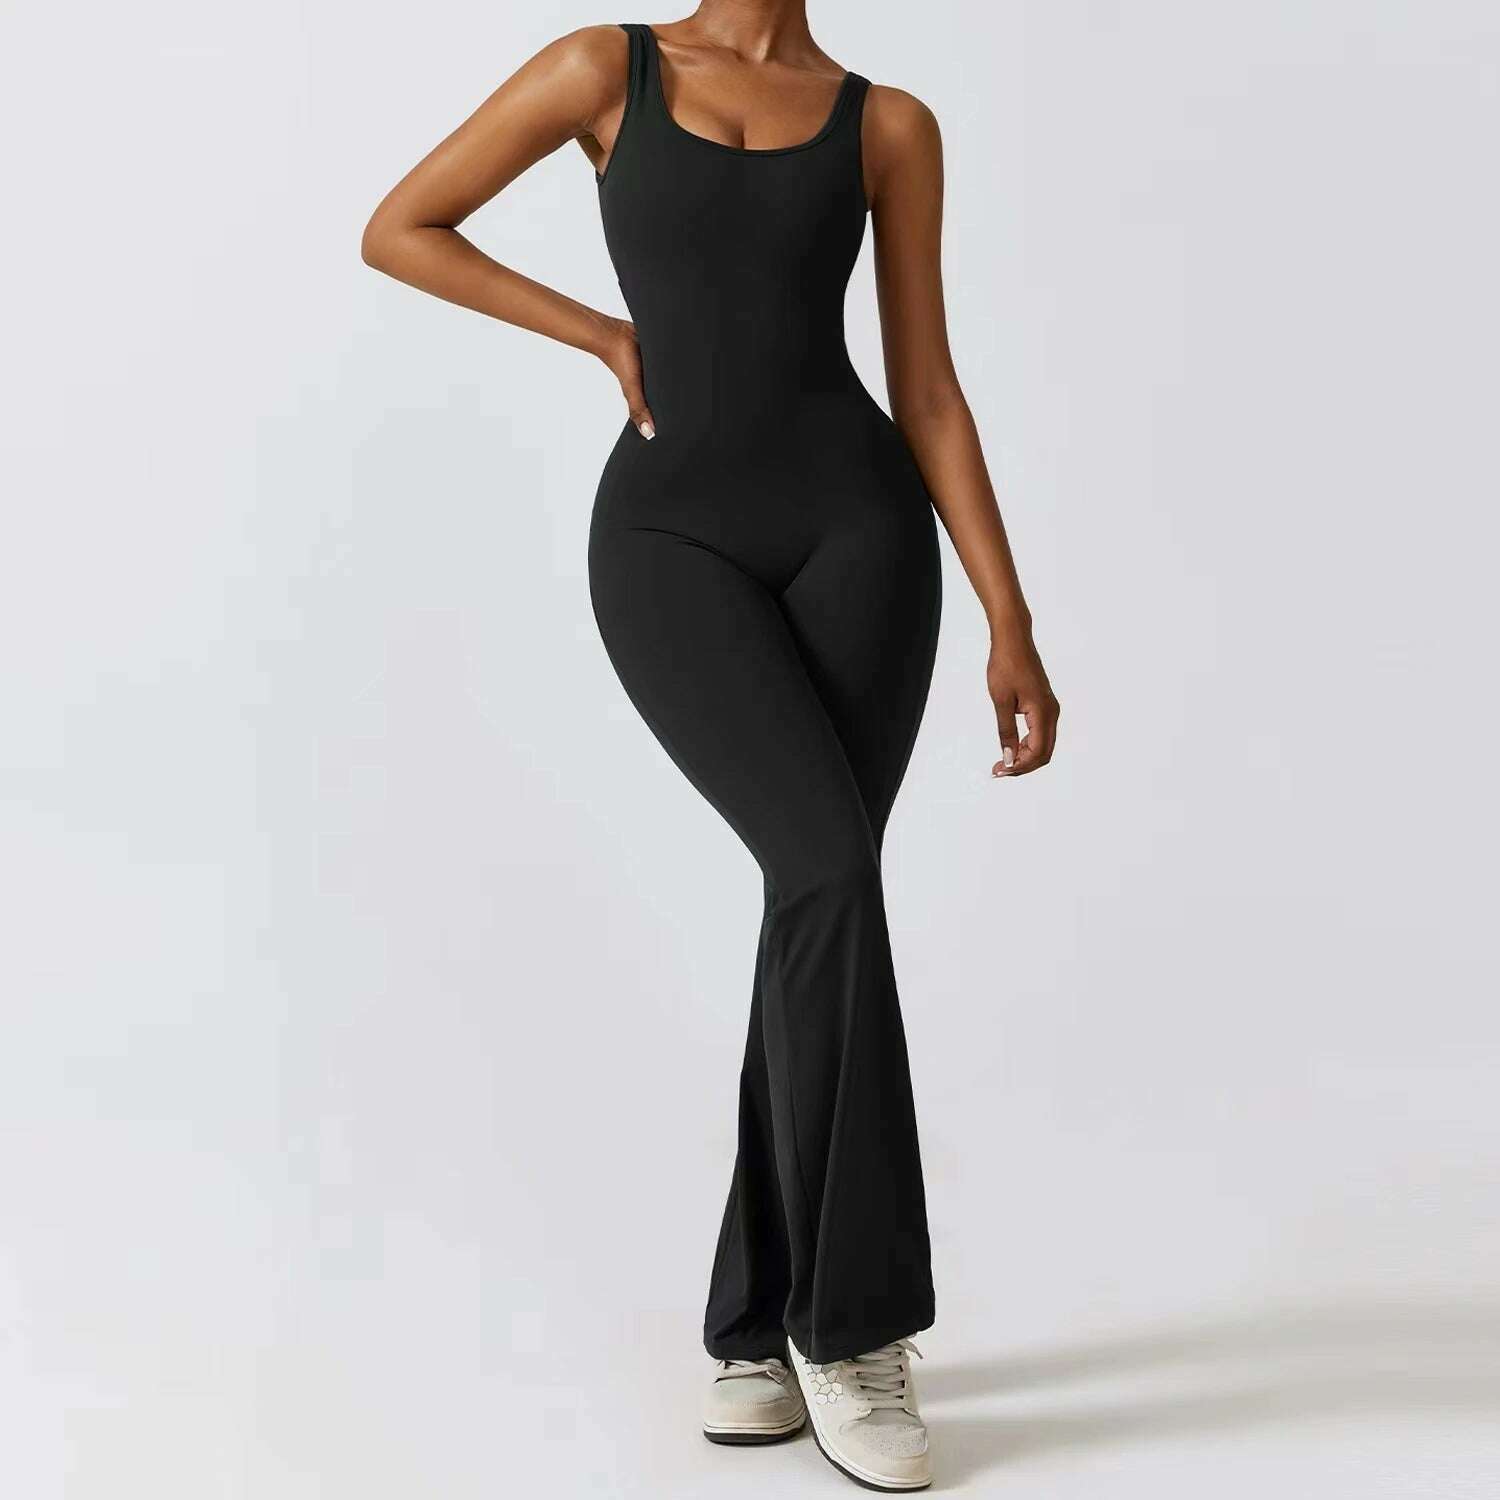 KIMLUD, Women's Sports Style Hollow Back Bodysuit Yoga Jumpsuit with Chest Pad Honey Peach Hip Flare Pants New Autumn Sports Style 831, black / S, KIMLUD Women's Clothes